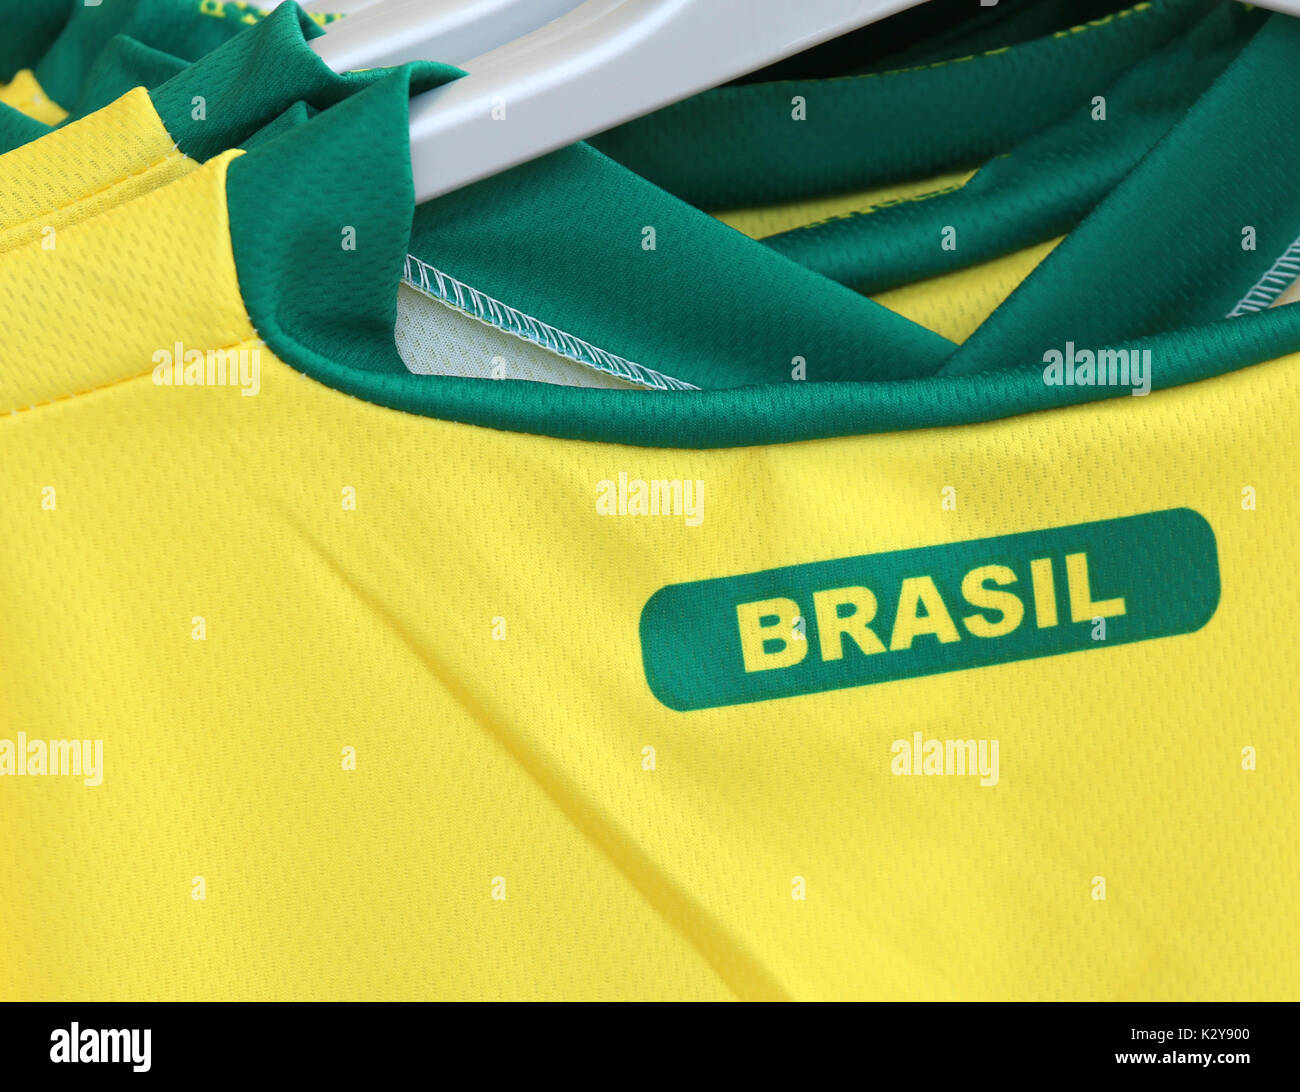 Football t-shirts with the text BRASIL which means Brazil for sale in the specialized sports shop Stock Photo